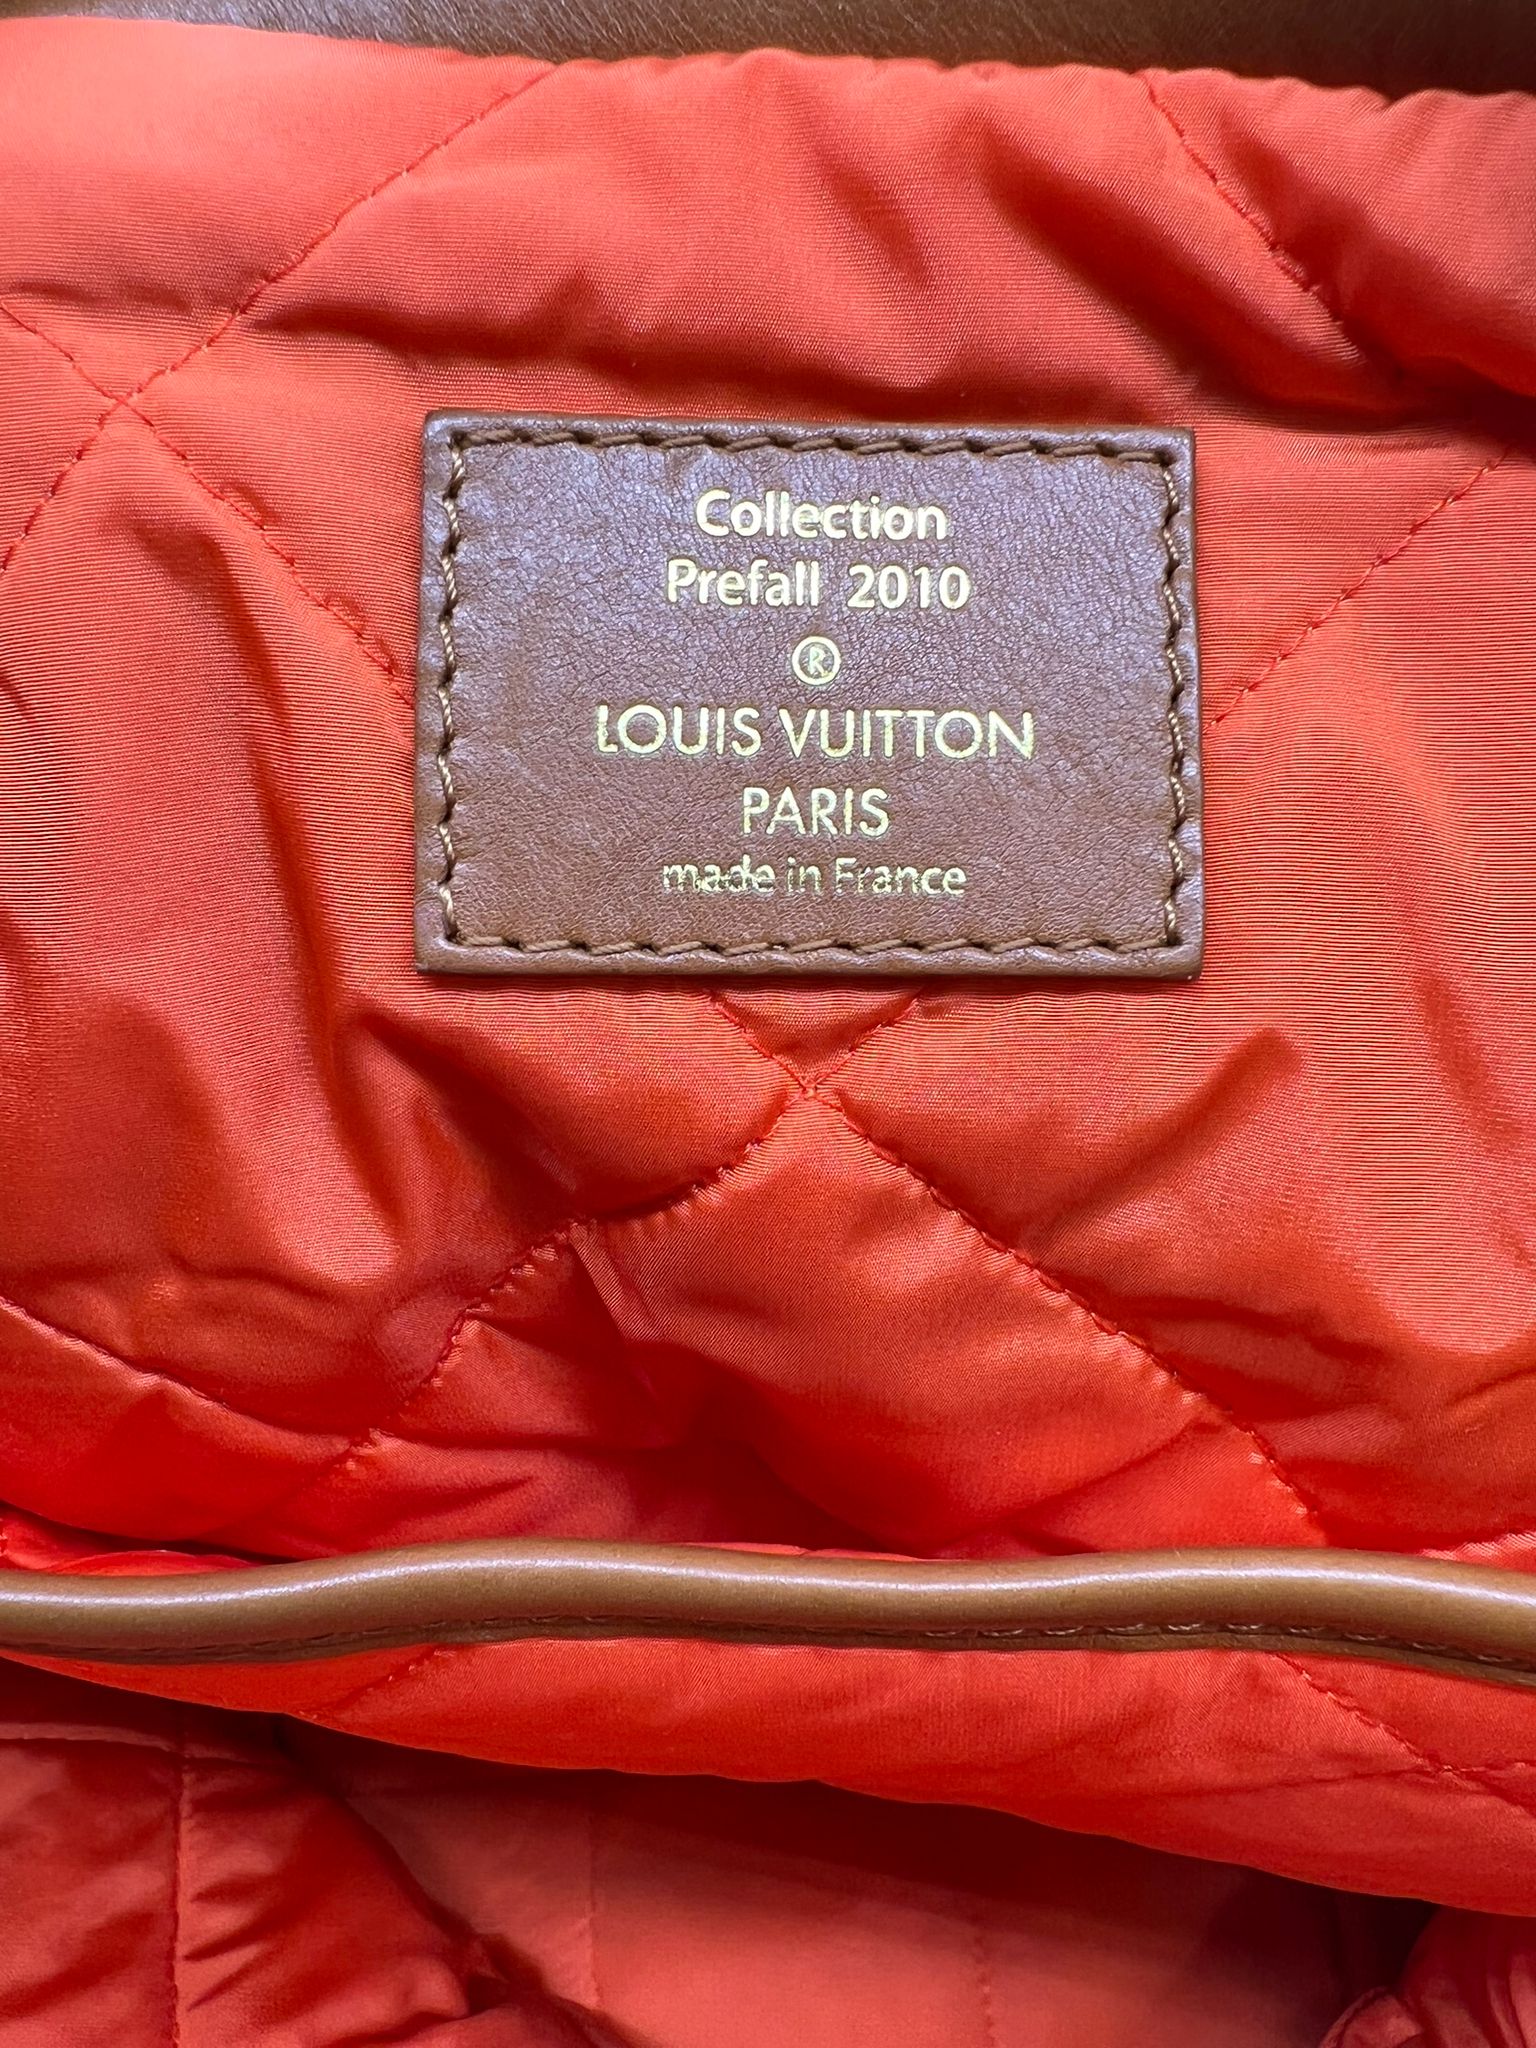 LOUIS VUITTON LIMITED EDITION